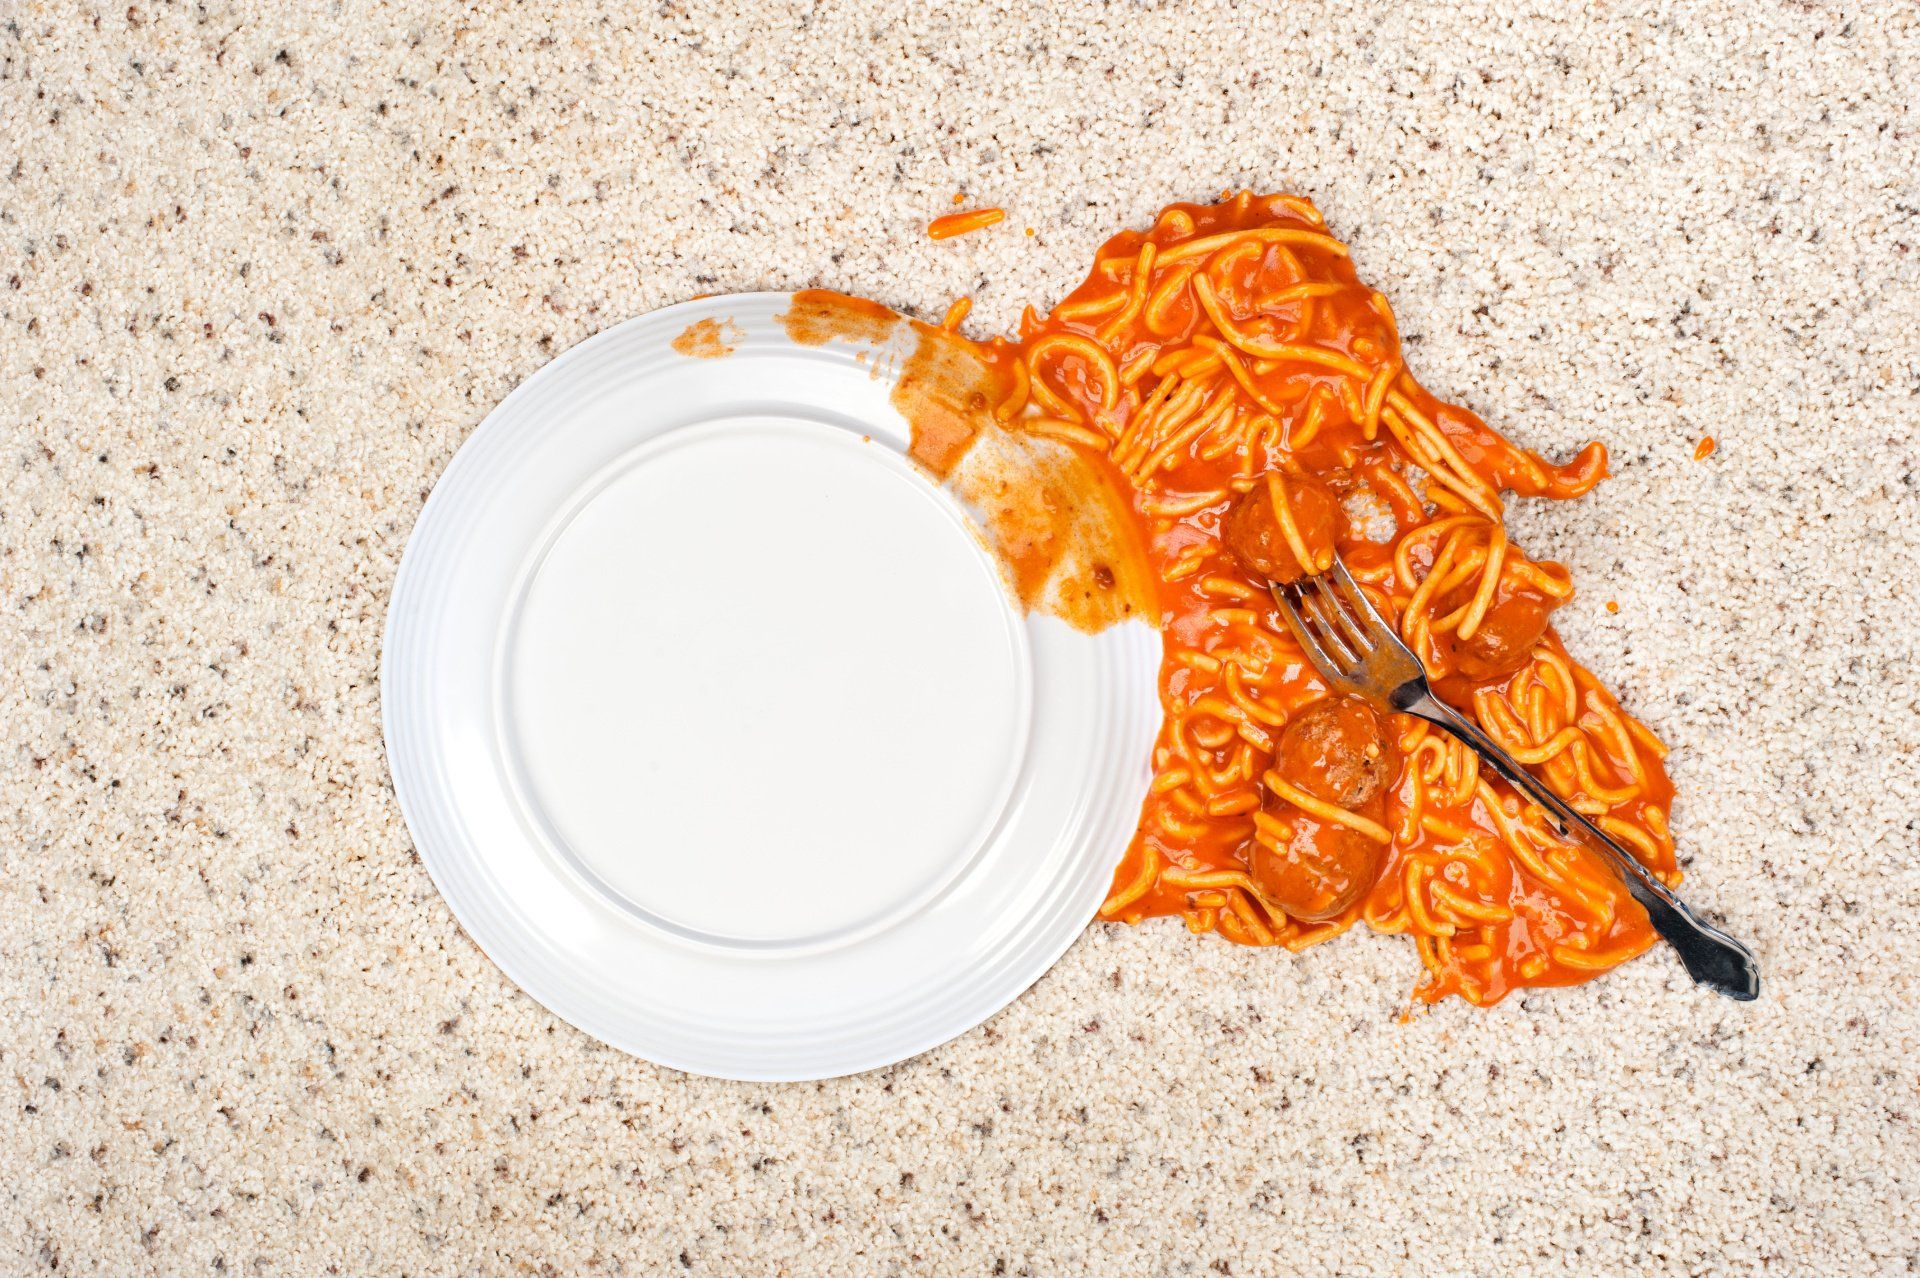 a plate of spaghetti spilled on carpet